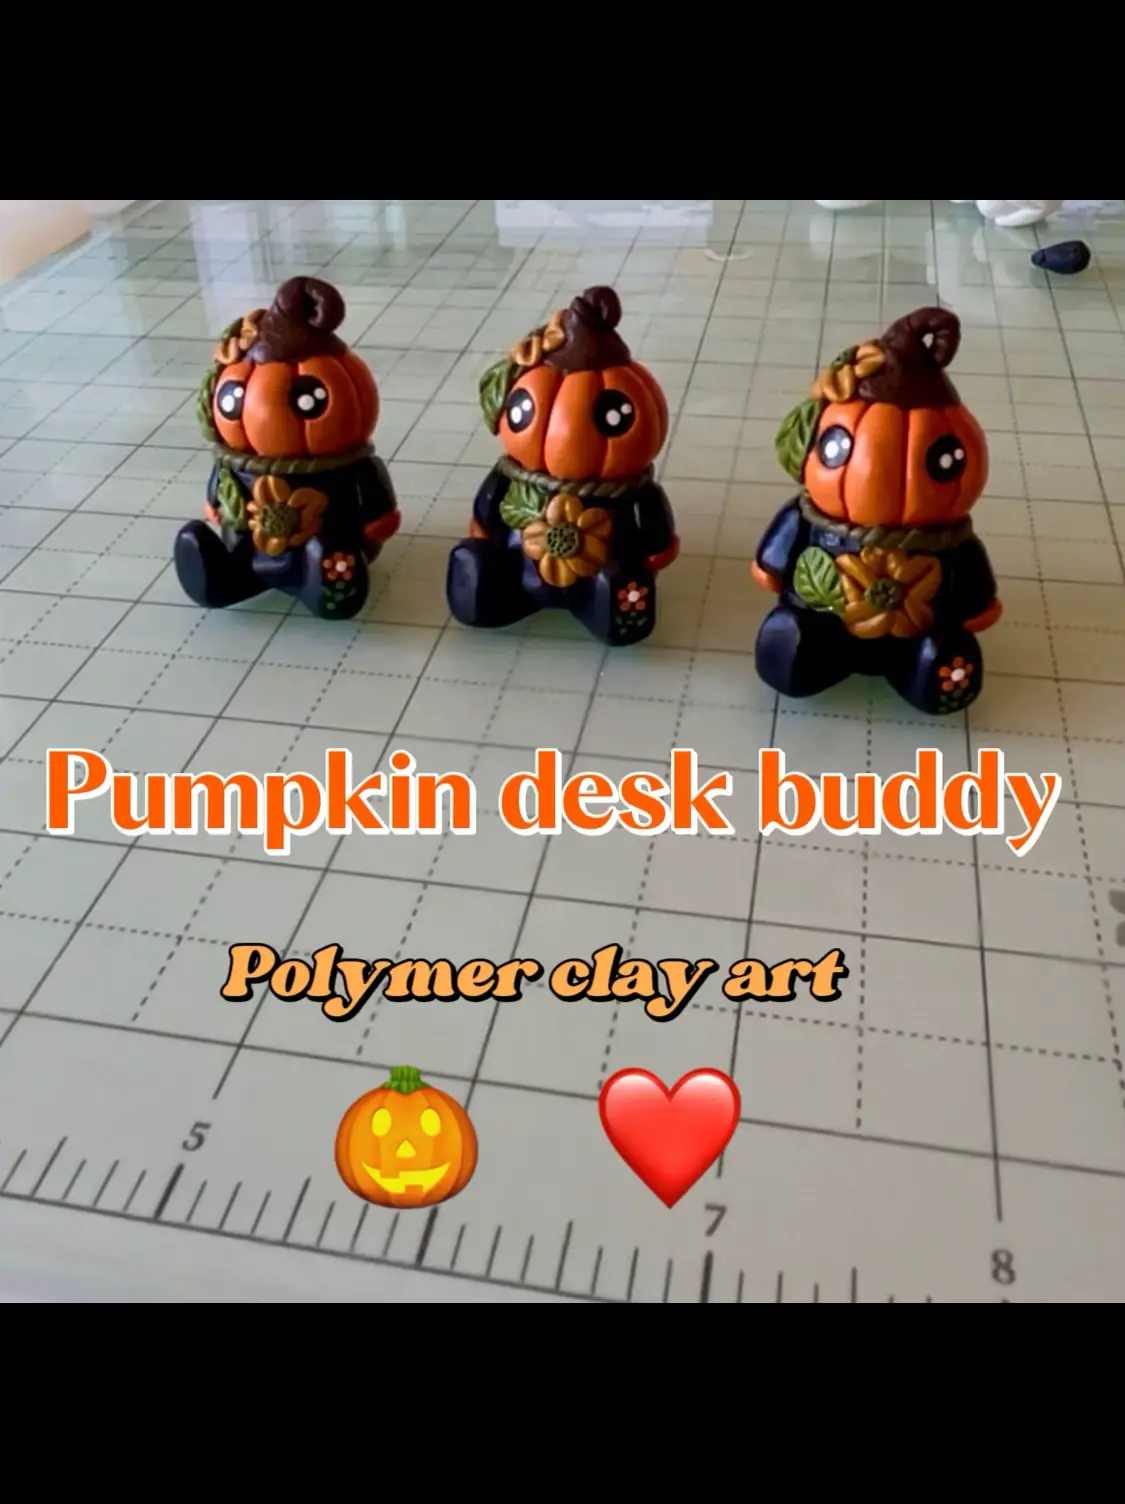 Pumpkin desk buddy, Gallery posted by Caro 😘❤️